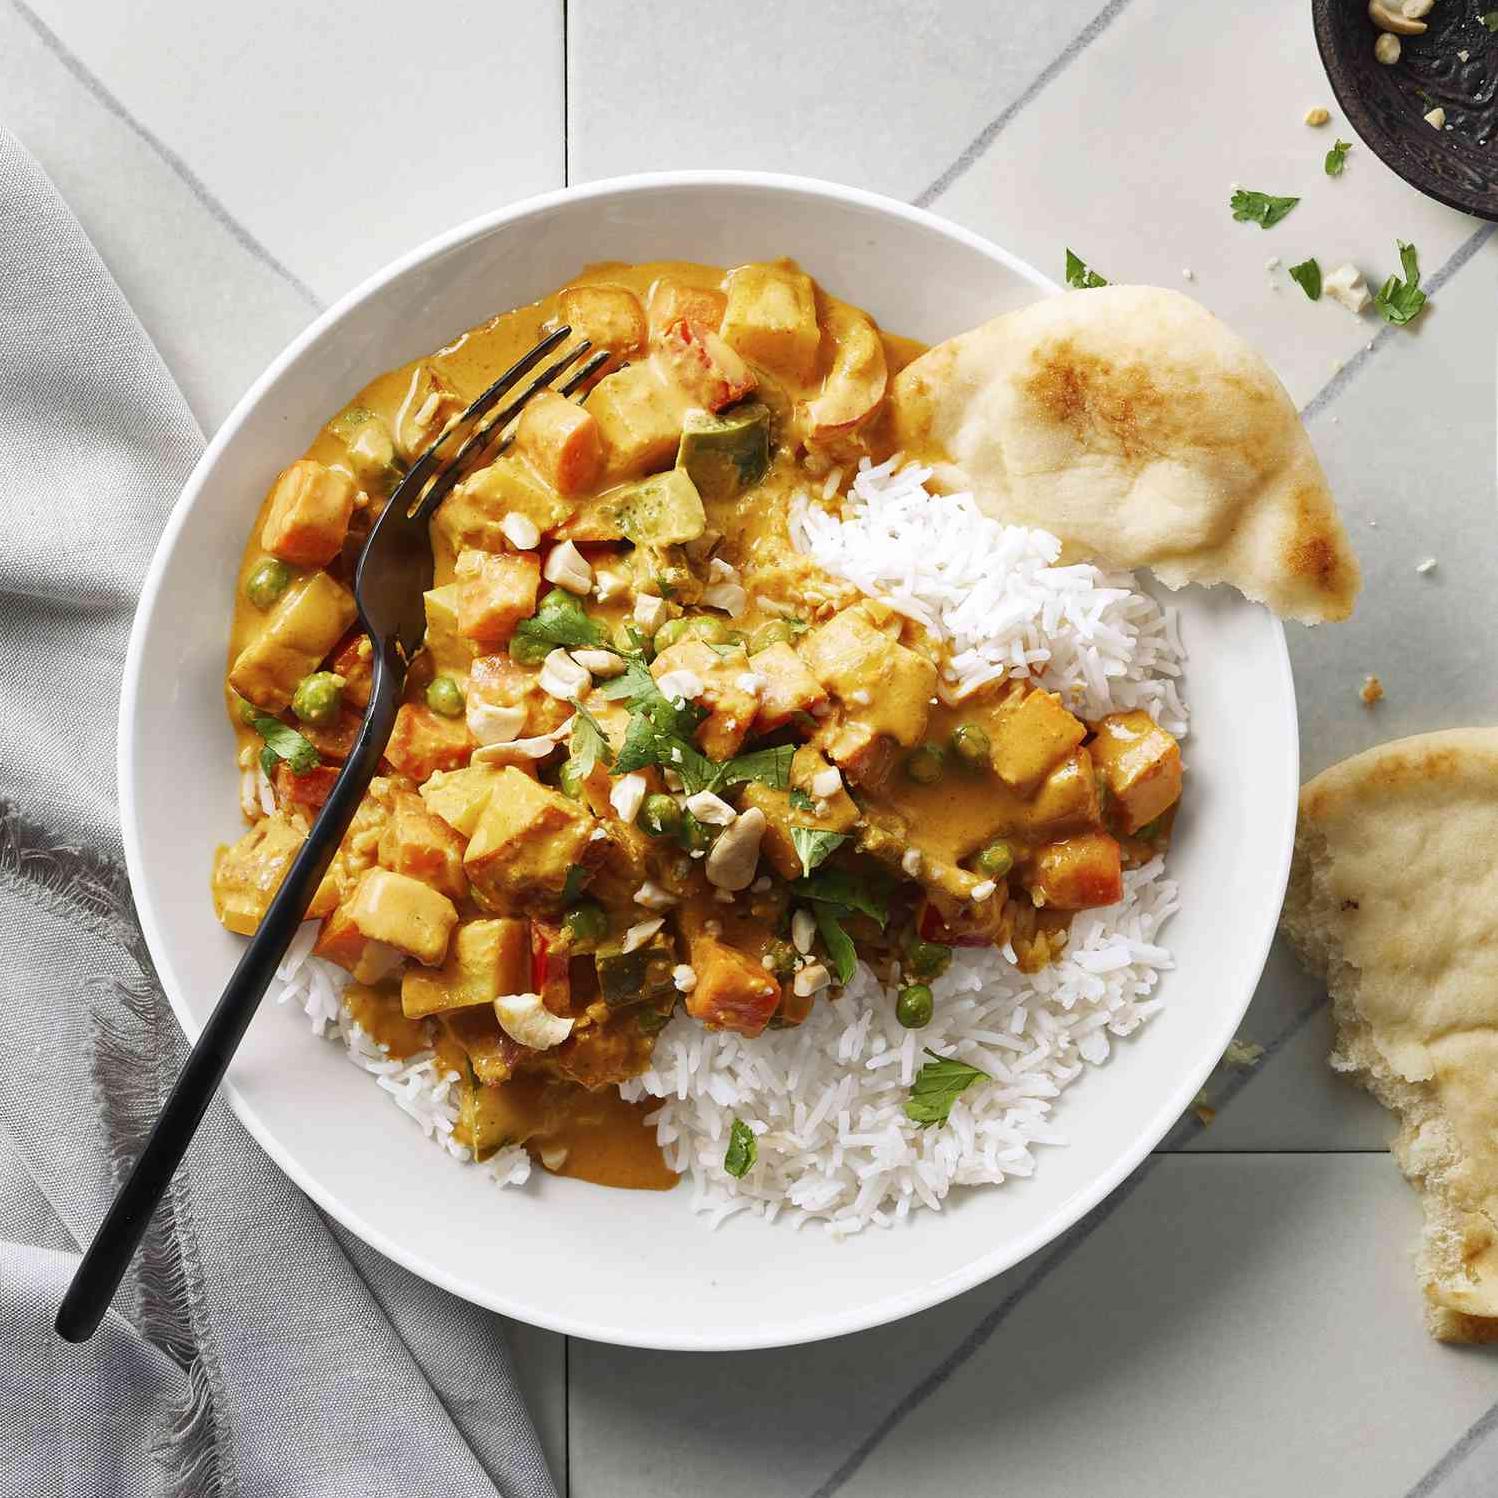  A hearty meal that's easy to make, this korma is perfect for busy weeknights.